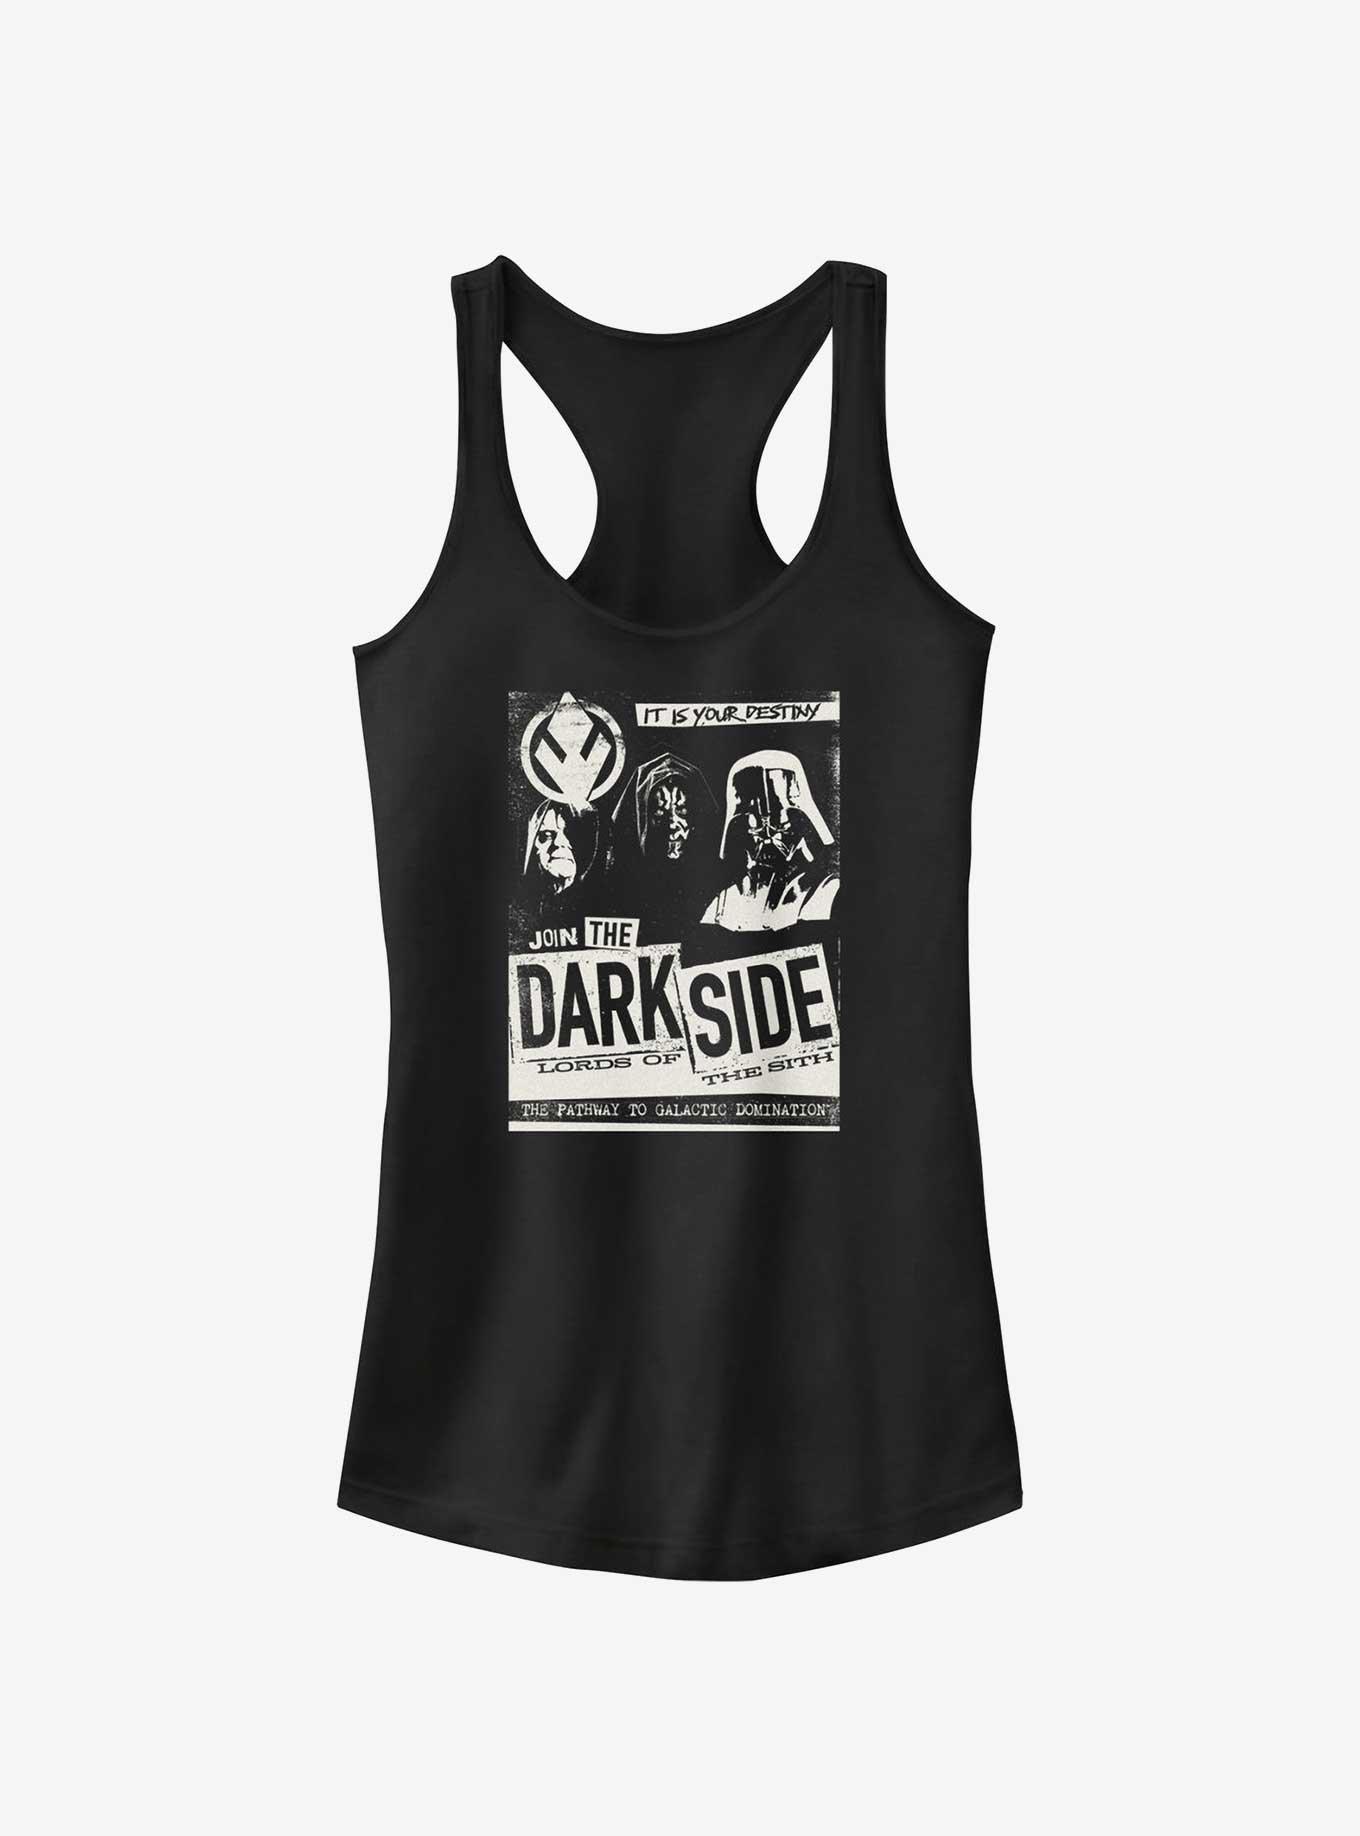 Star Wars Year of the Dark Side Join Our Side Girls Tank, BLACK, hi-res